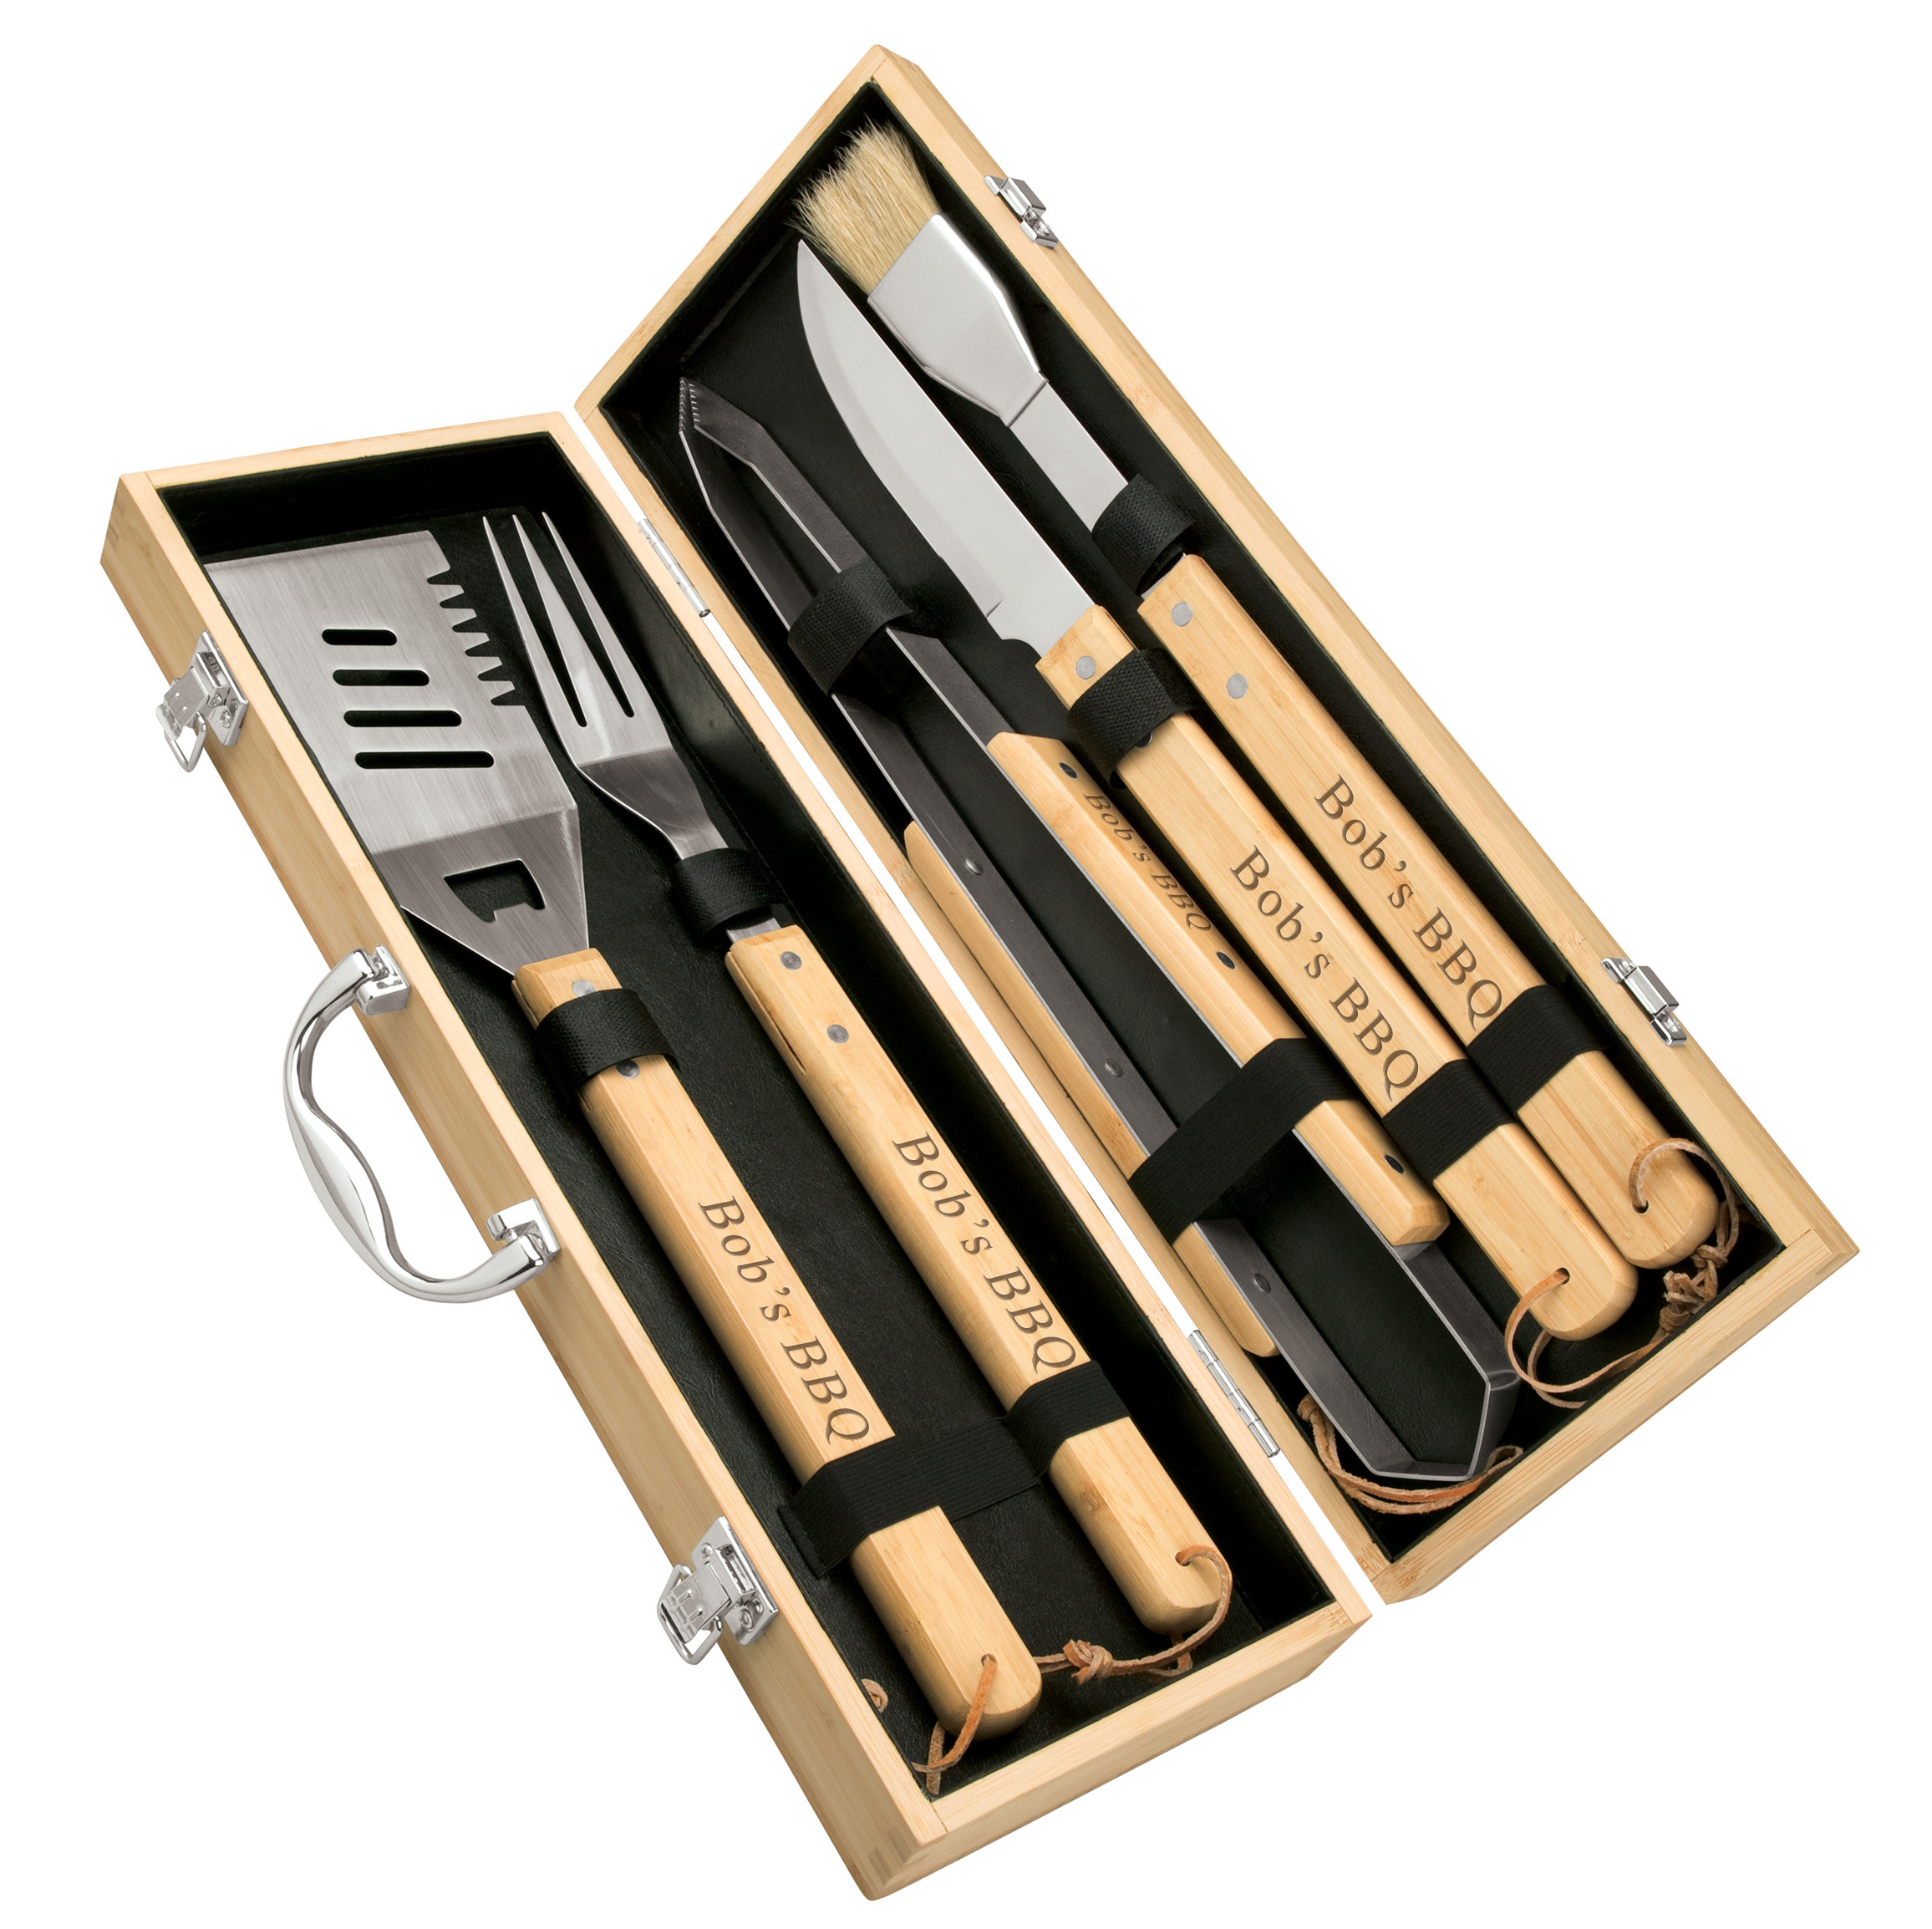 Country Wooden BBQ Grilling Utensils Set